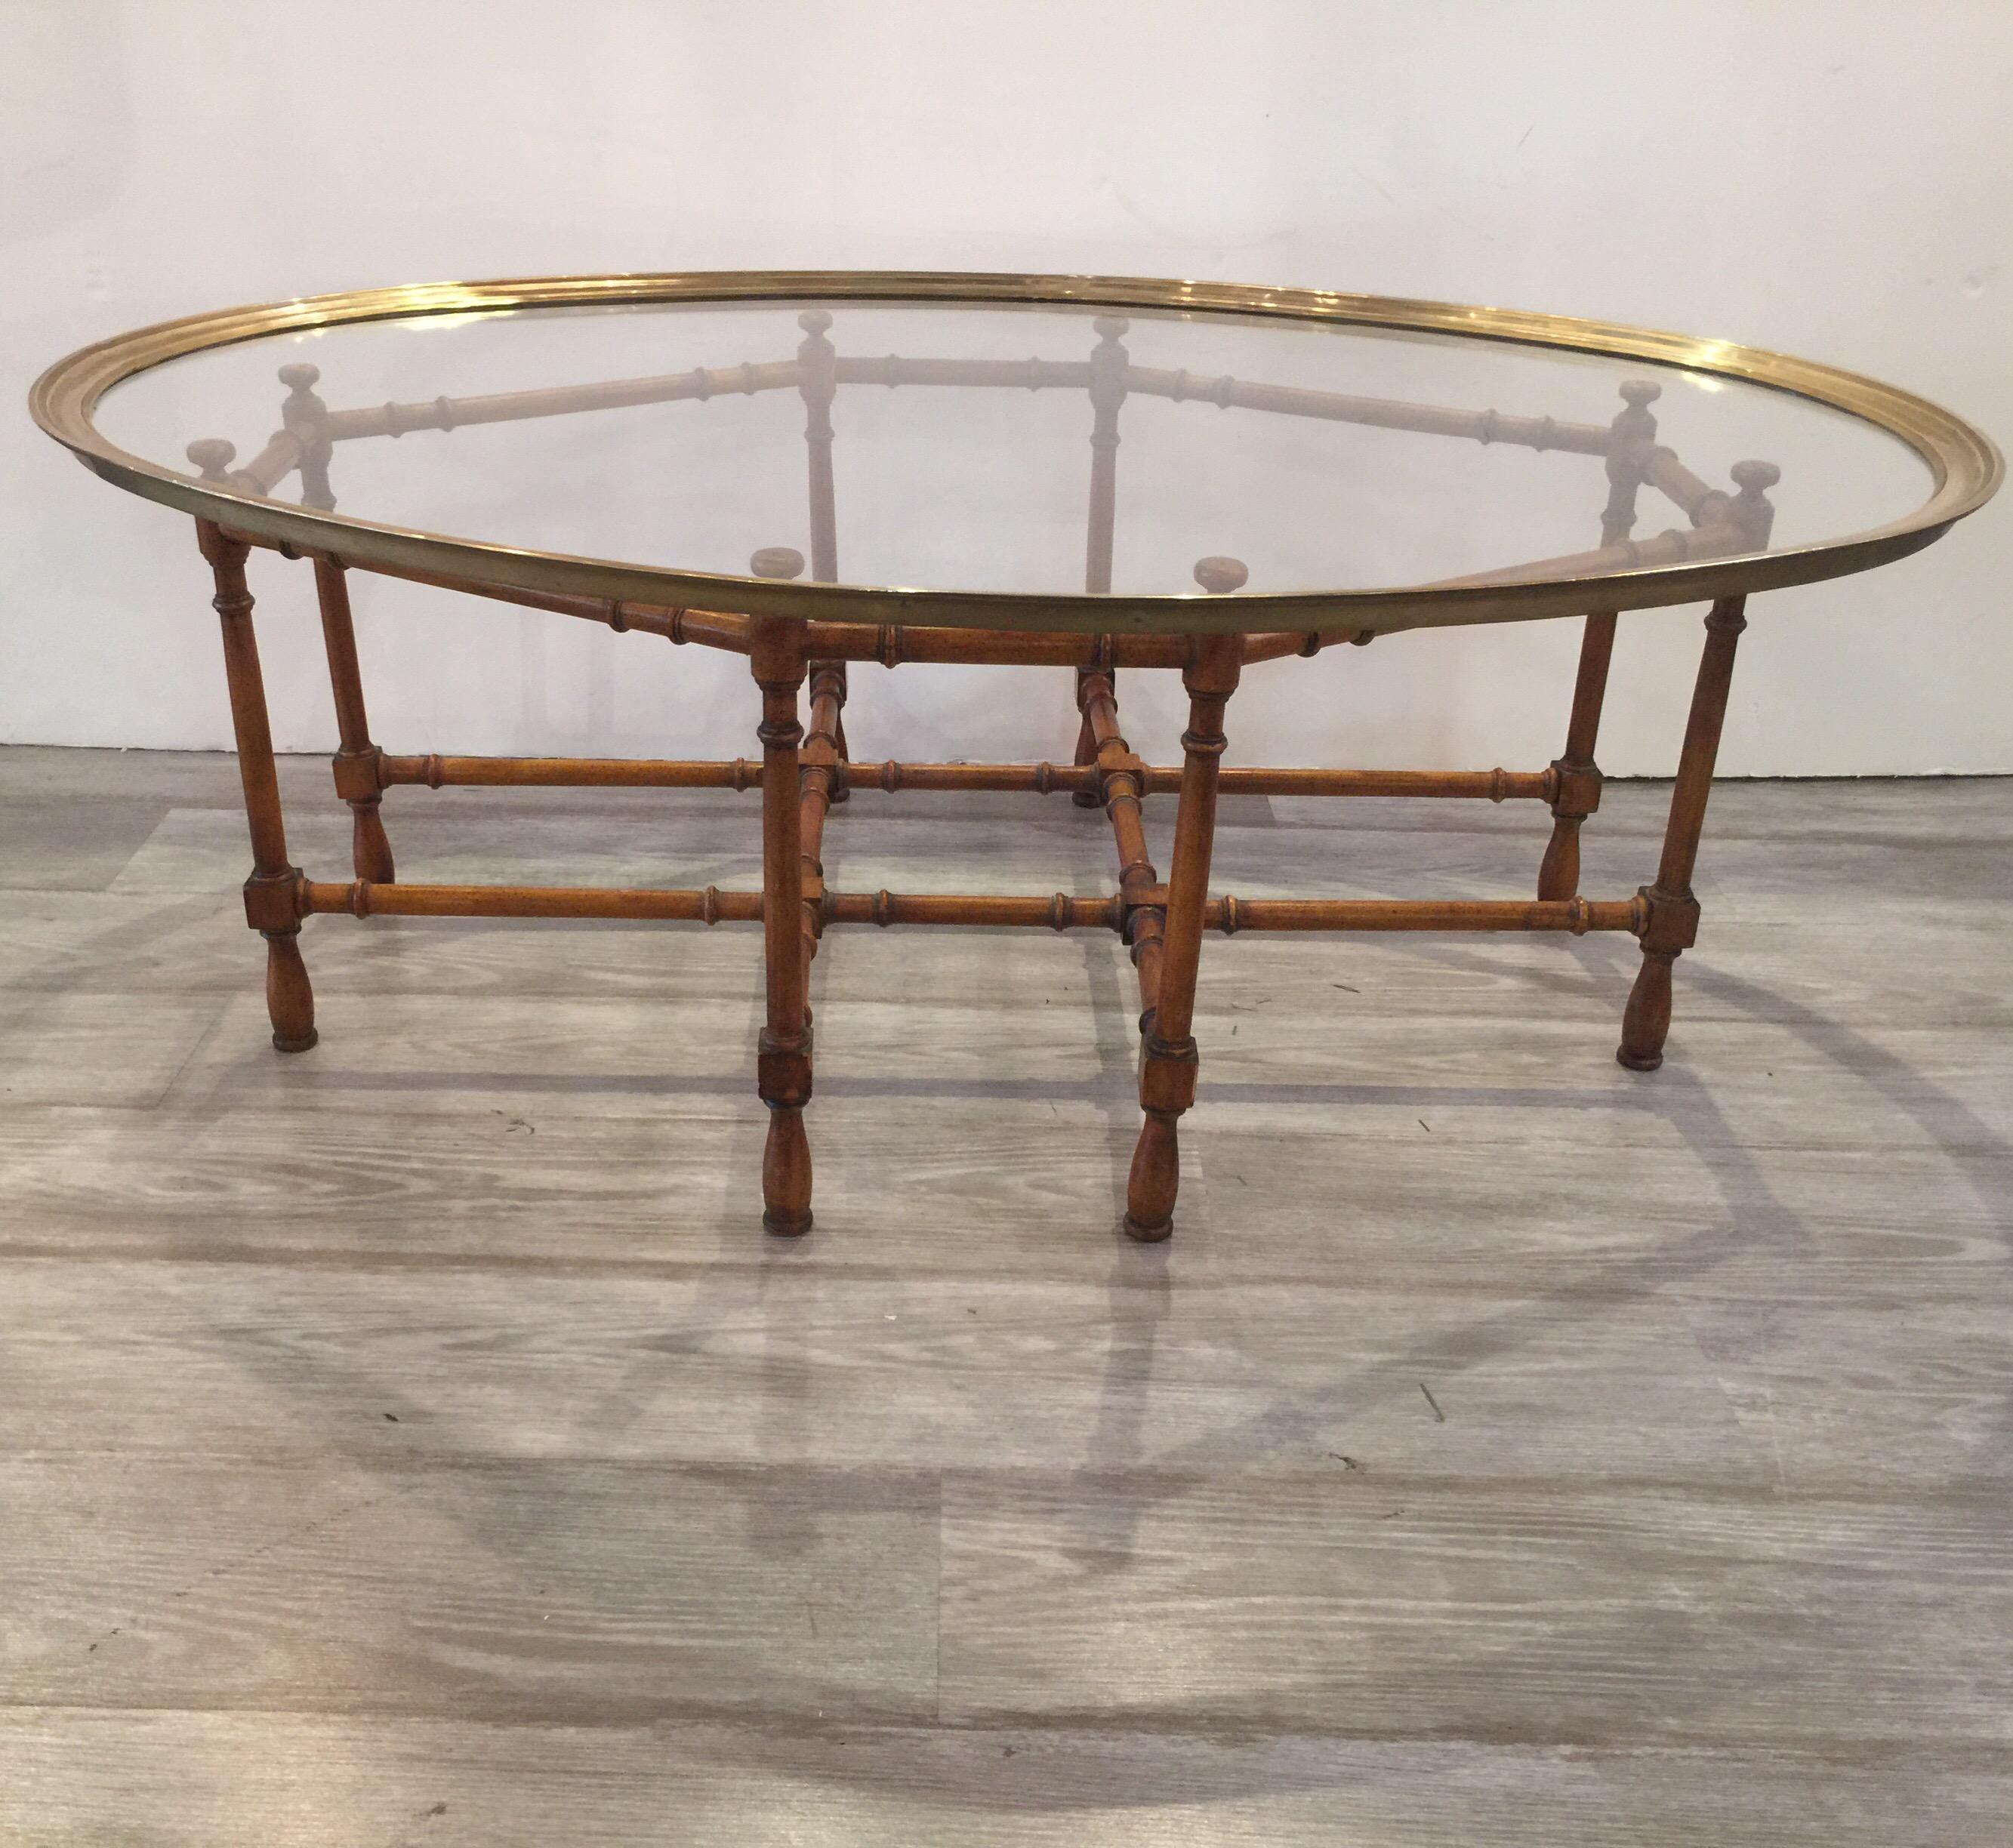 Baker faux bamboo cocktail/coffee table with brass and glass top from the 1970s
Nice table with a removable top for easy moving and cleaning 
Dimensions: 31.5